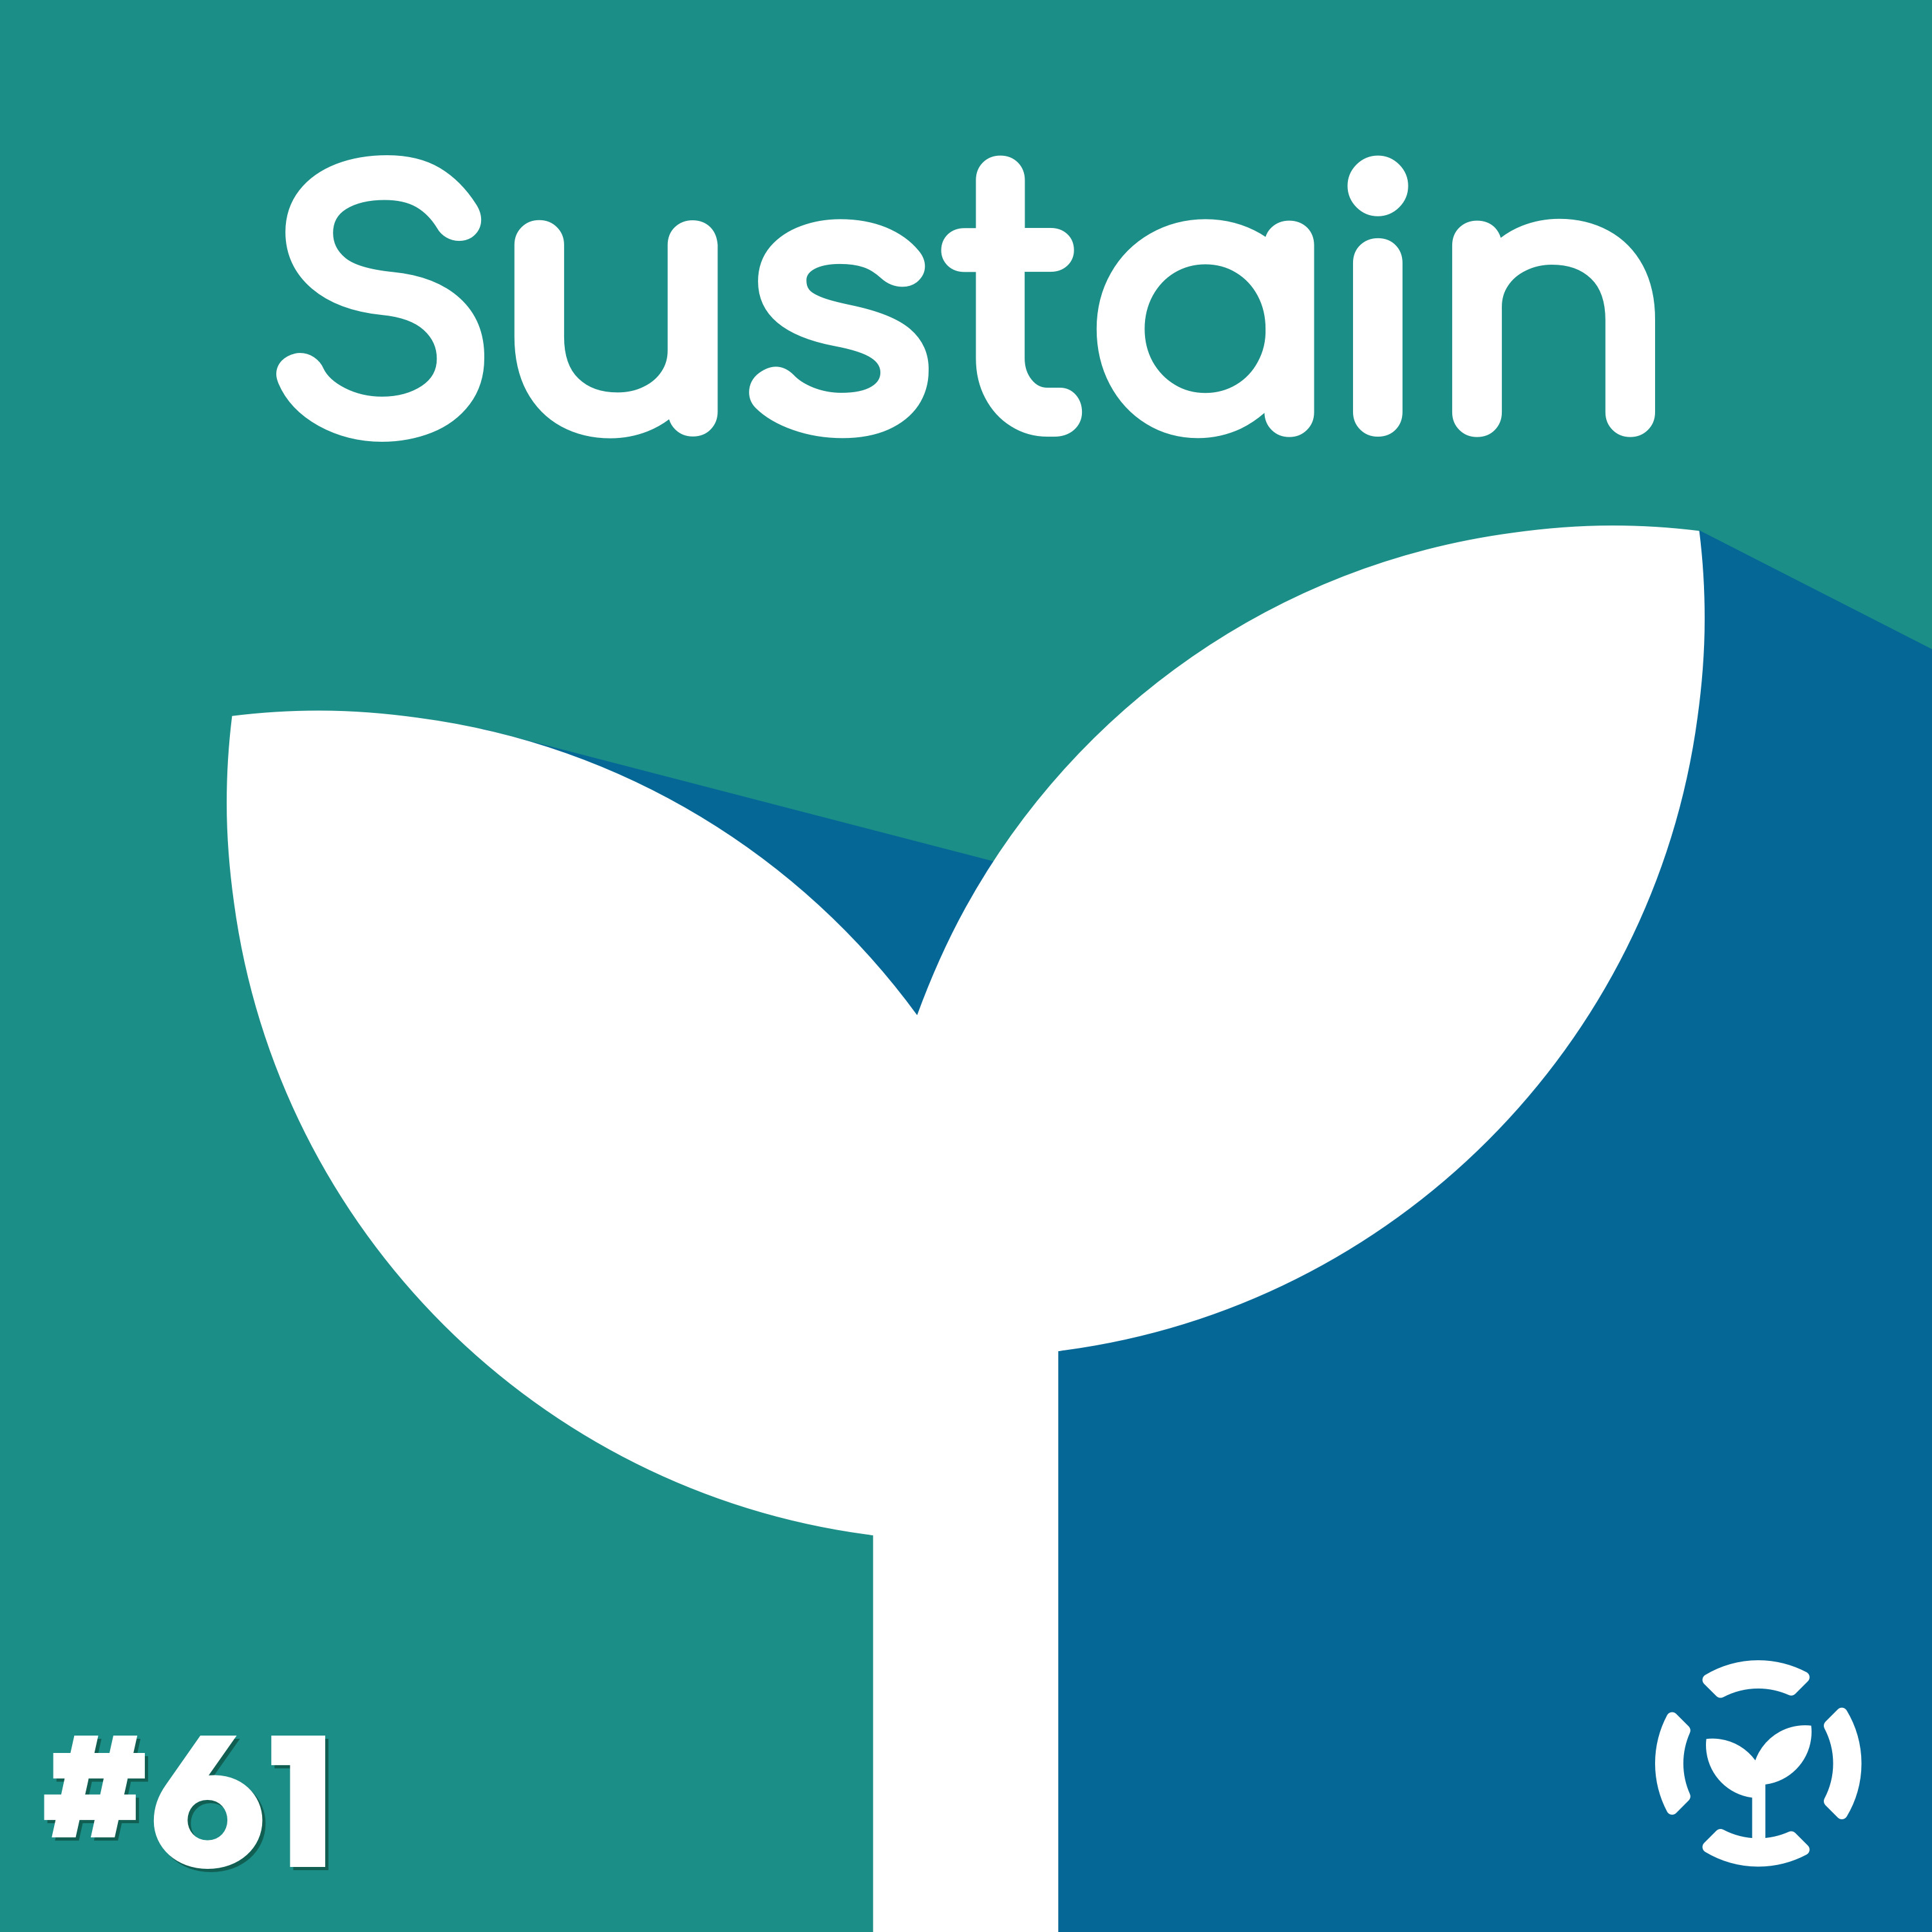 Episode 61: Melissa Logan on Marketing Open Source Effectively and Sustainably